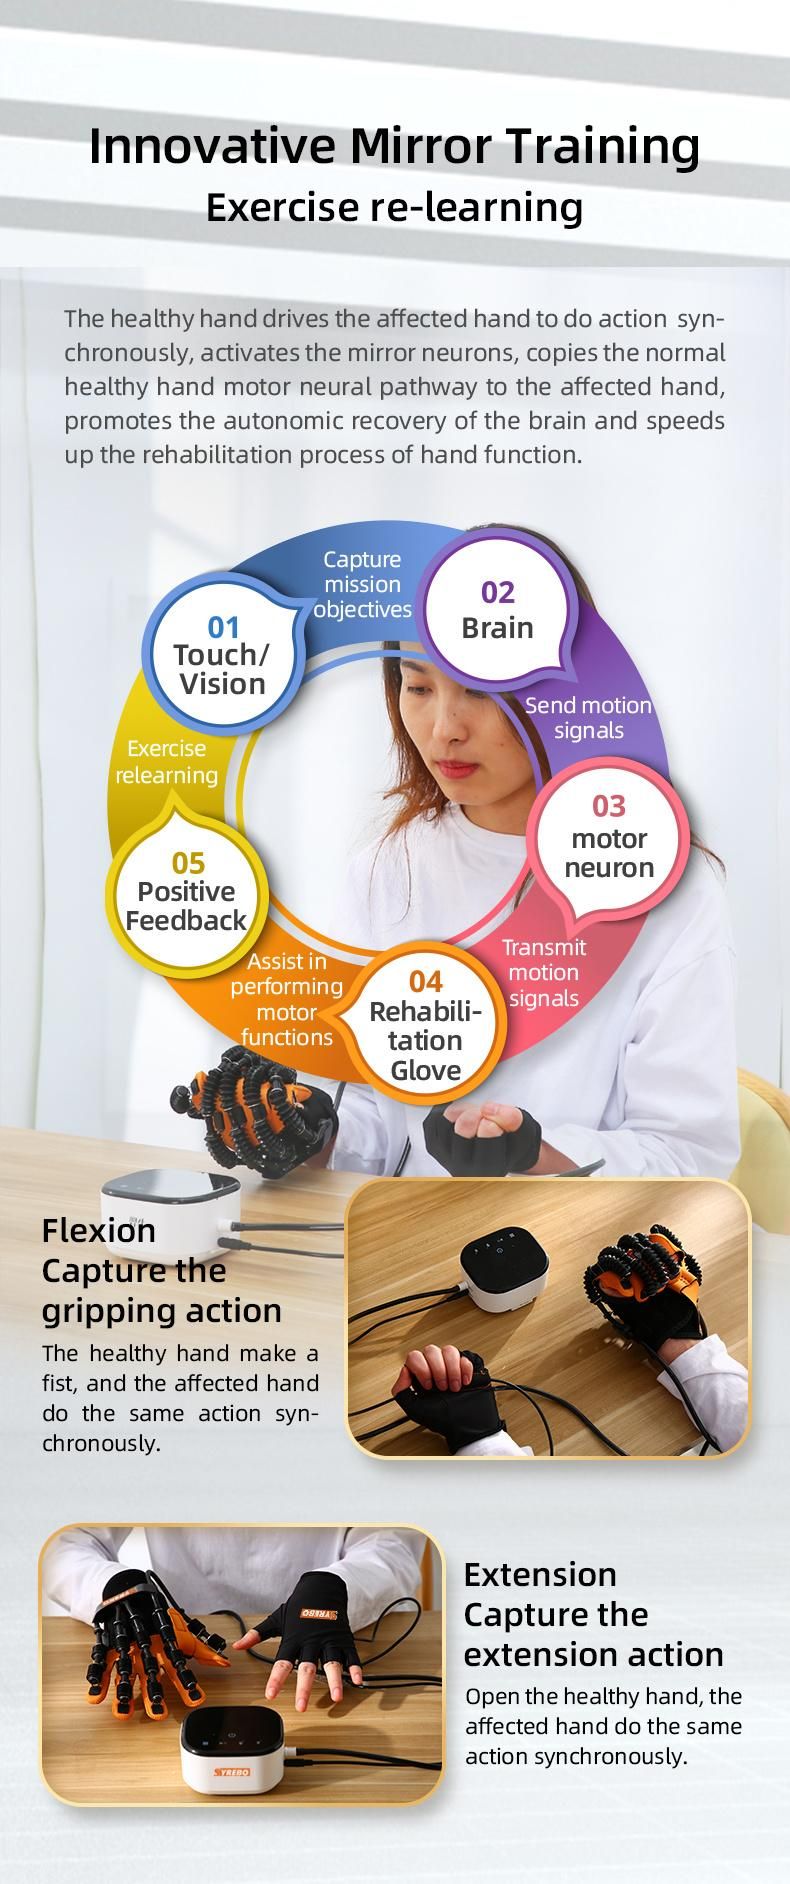 Robotic Therapy Equipment Stroke Patient Soft Robotic Glove at-Home Rehabilitation